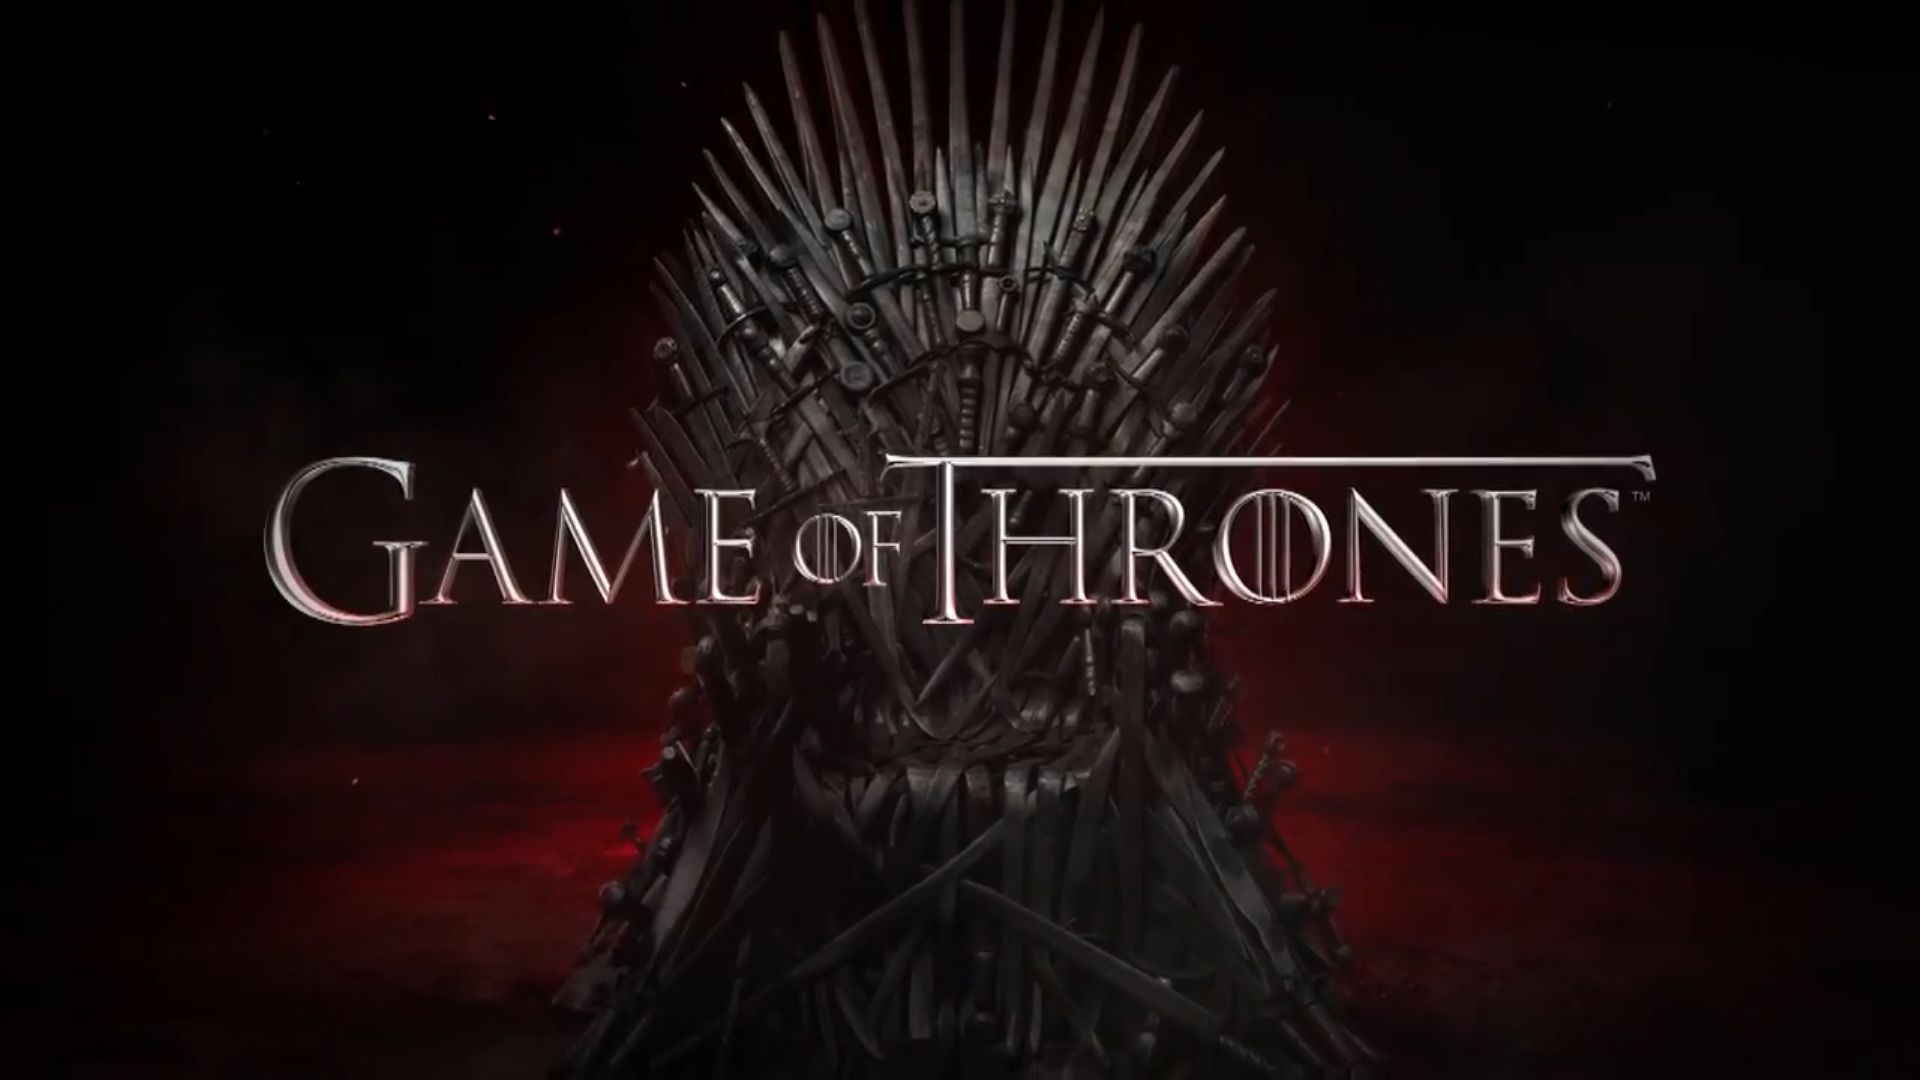 Wallpapers For Game Of Thrones Iron Throne Wallpaper 1920x1080 1920x1080